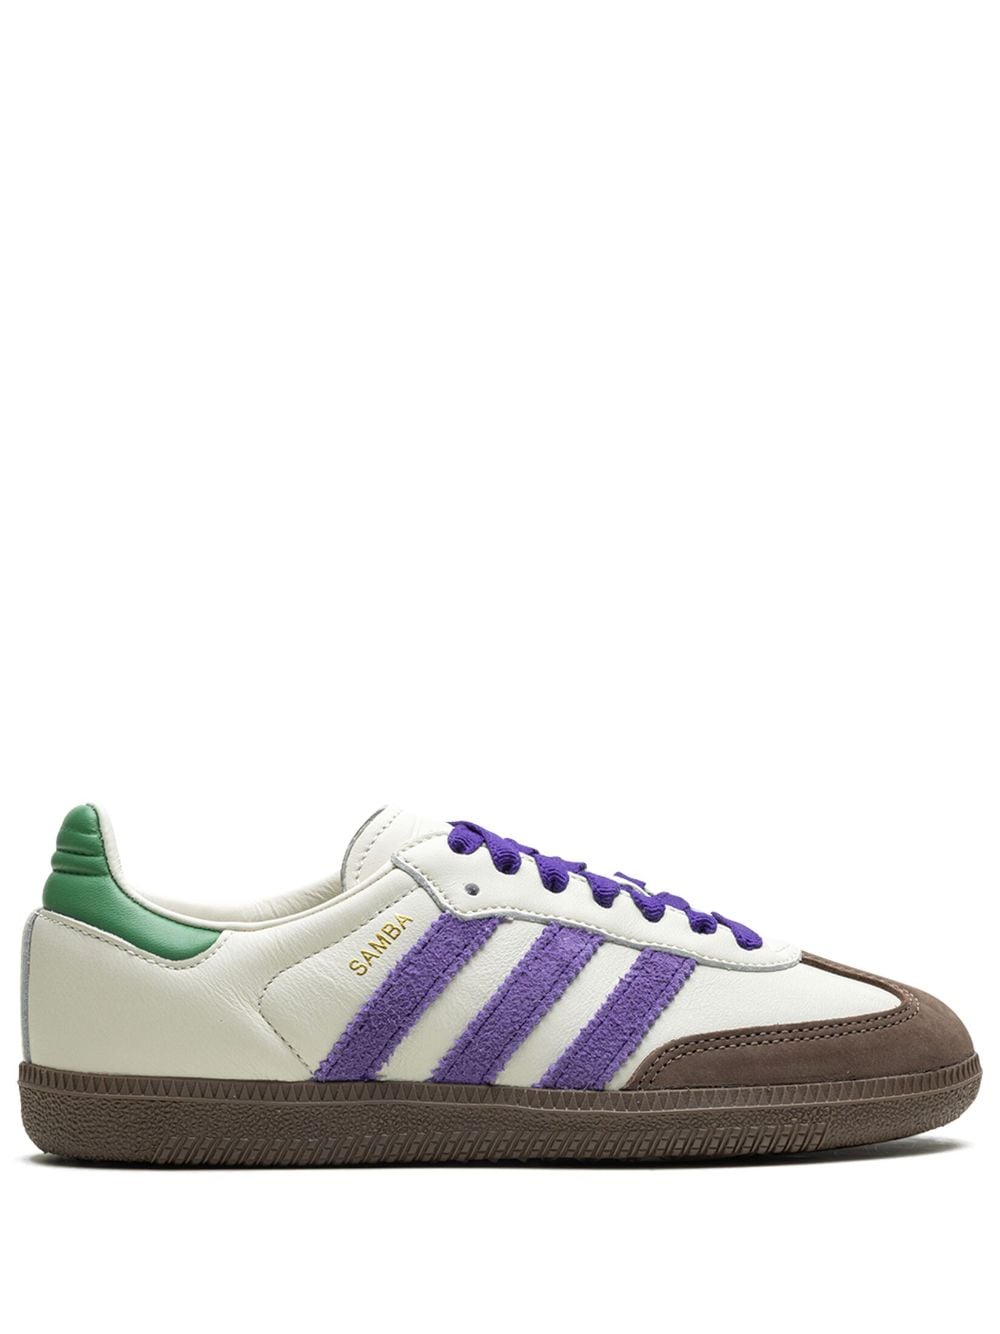 Adidas Originals Samba Og Leather Sneakers In White